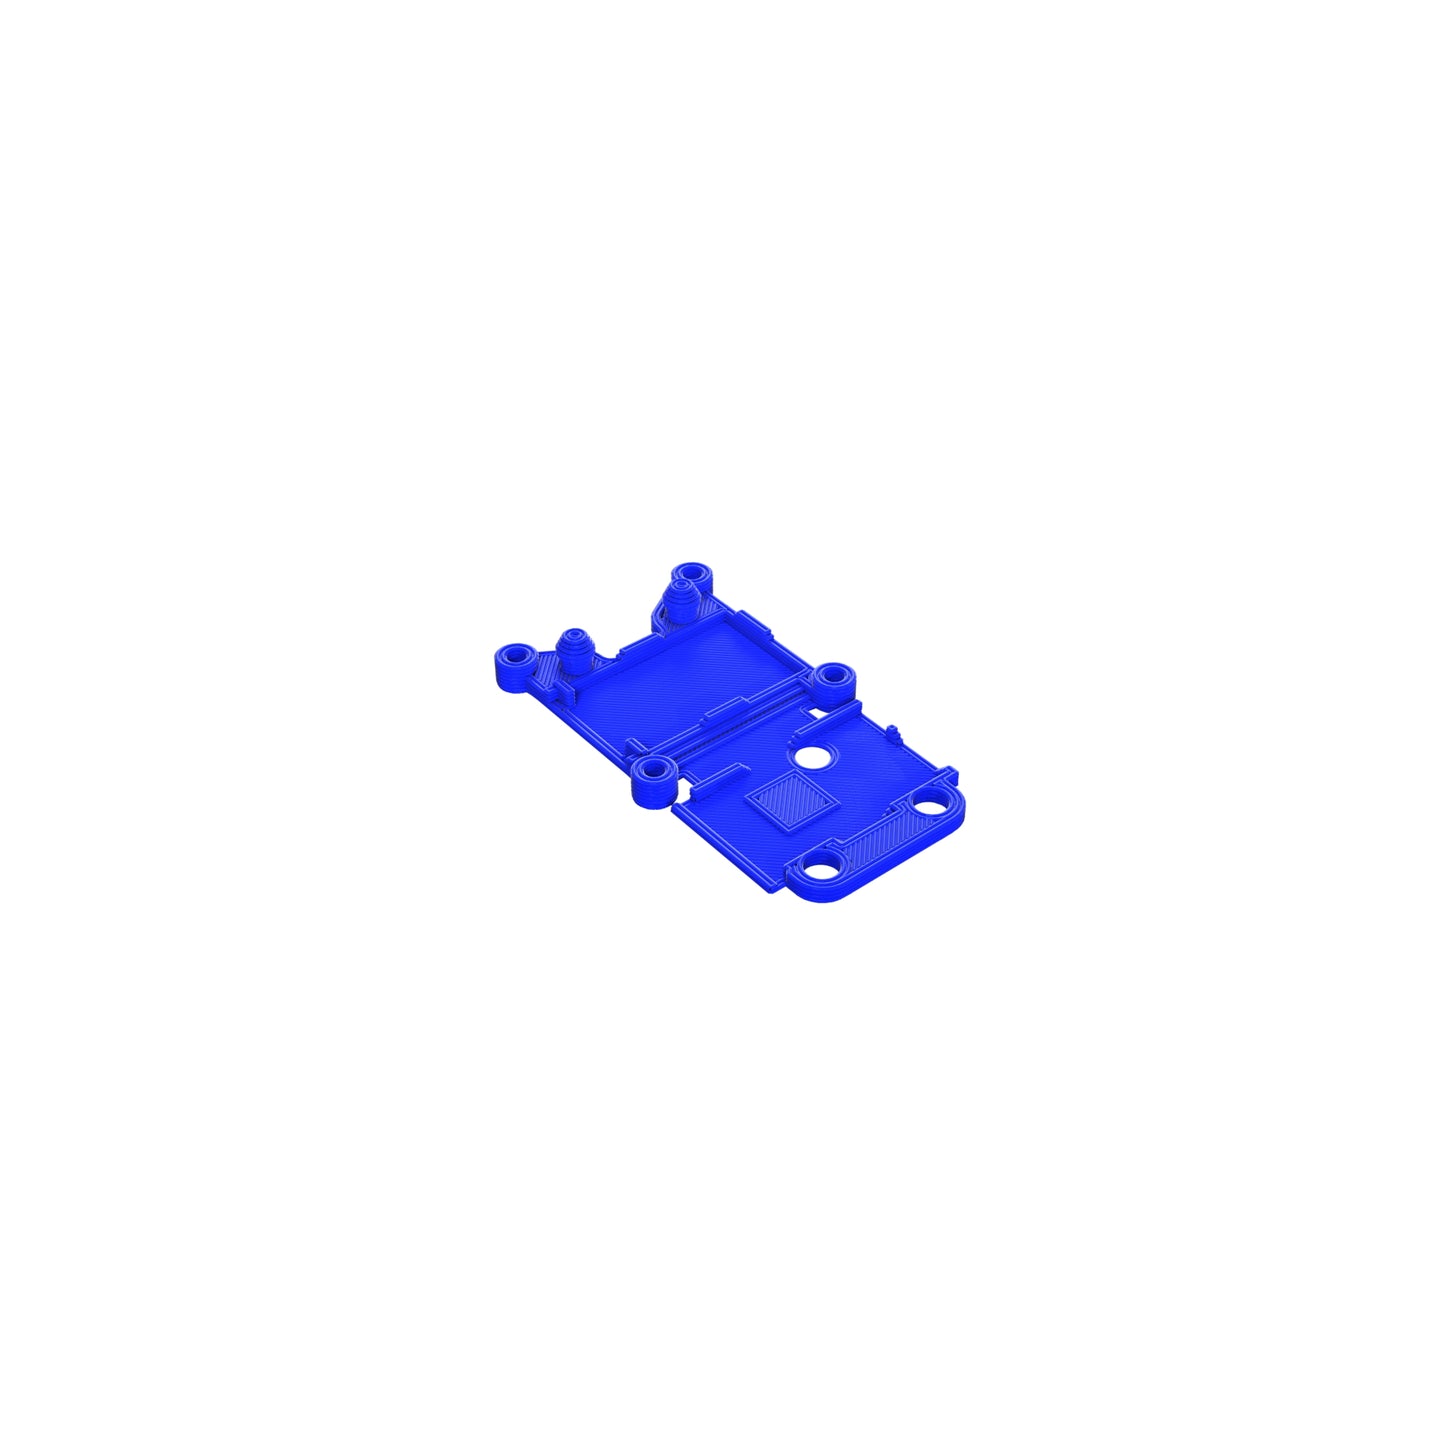 Crossfire 20 x 20 TPU Stack Mount 3D Printed Blue